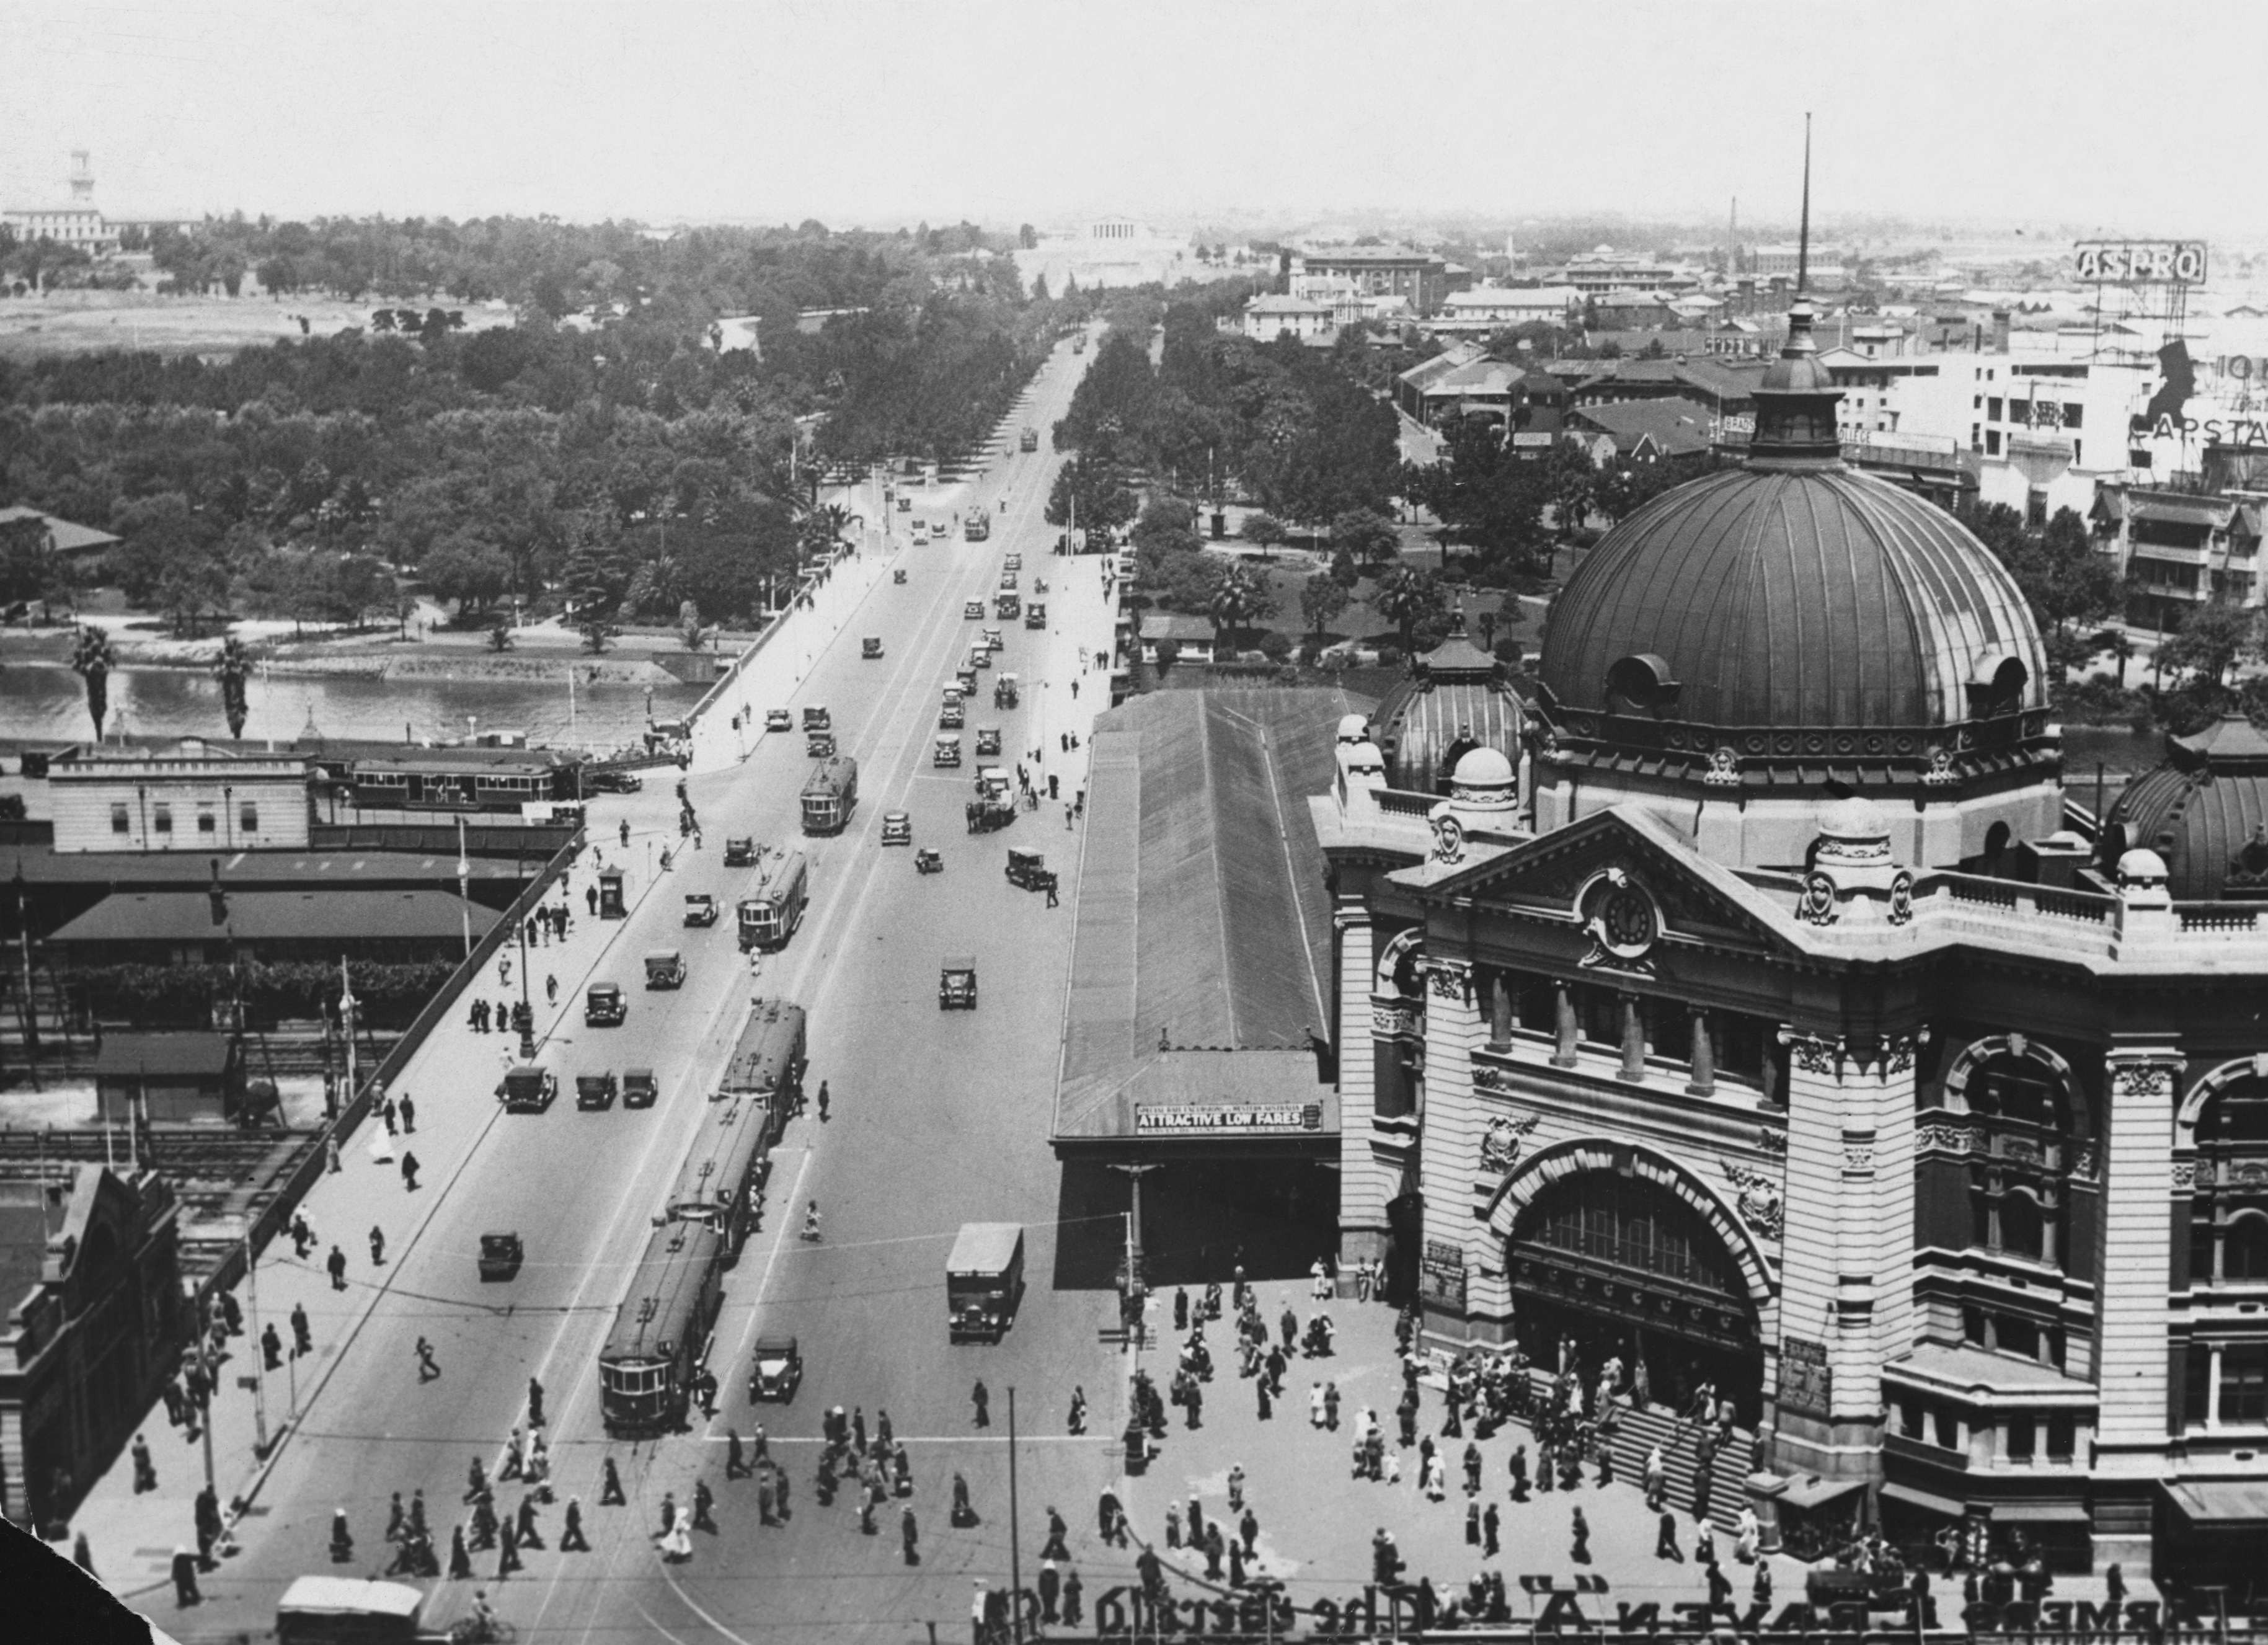 Slide 16 of 29: The domed Flinders Street Station building stands on a corner of St. Kilda Road which connects central Melbourne with the seaside suburb of St. Kilda. (Photo by © Hulton-Deutsch Collection/CORBIS/Corbis via Getty Images)